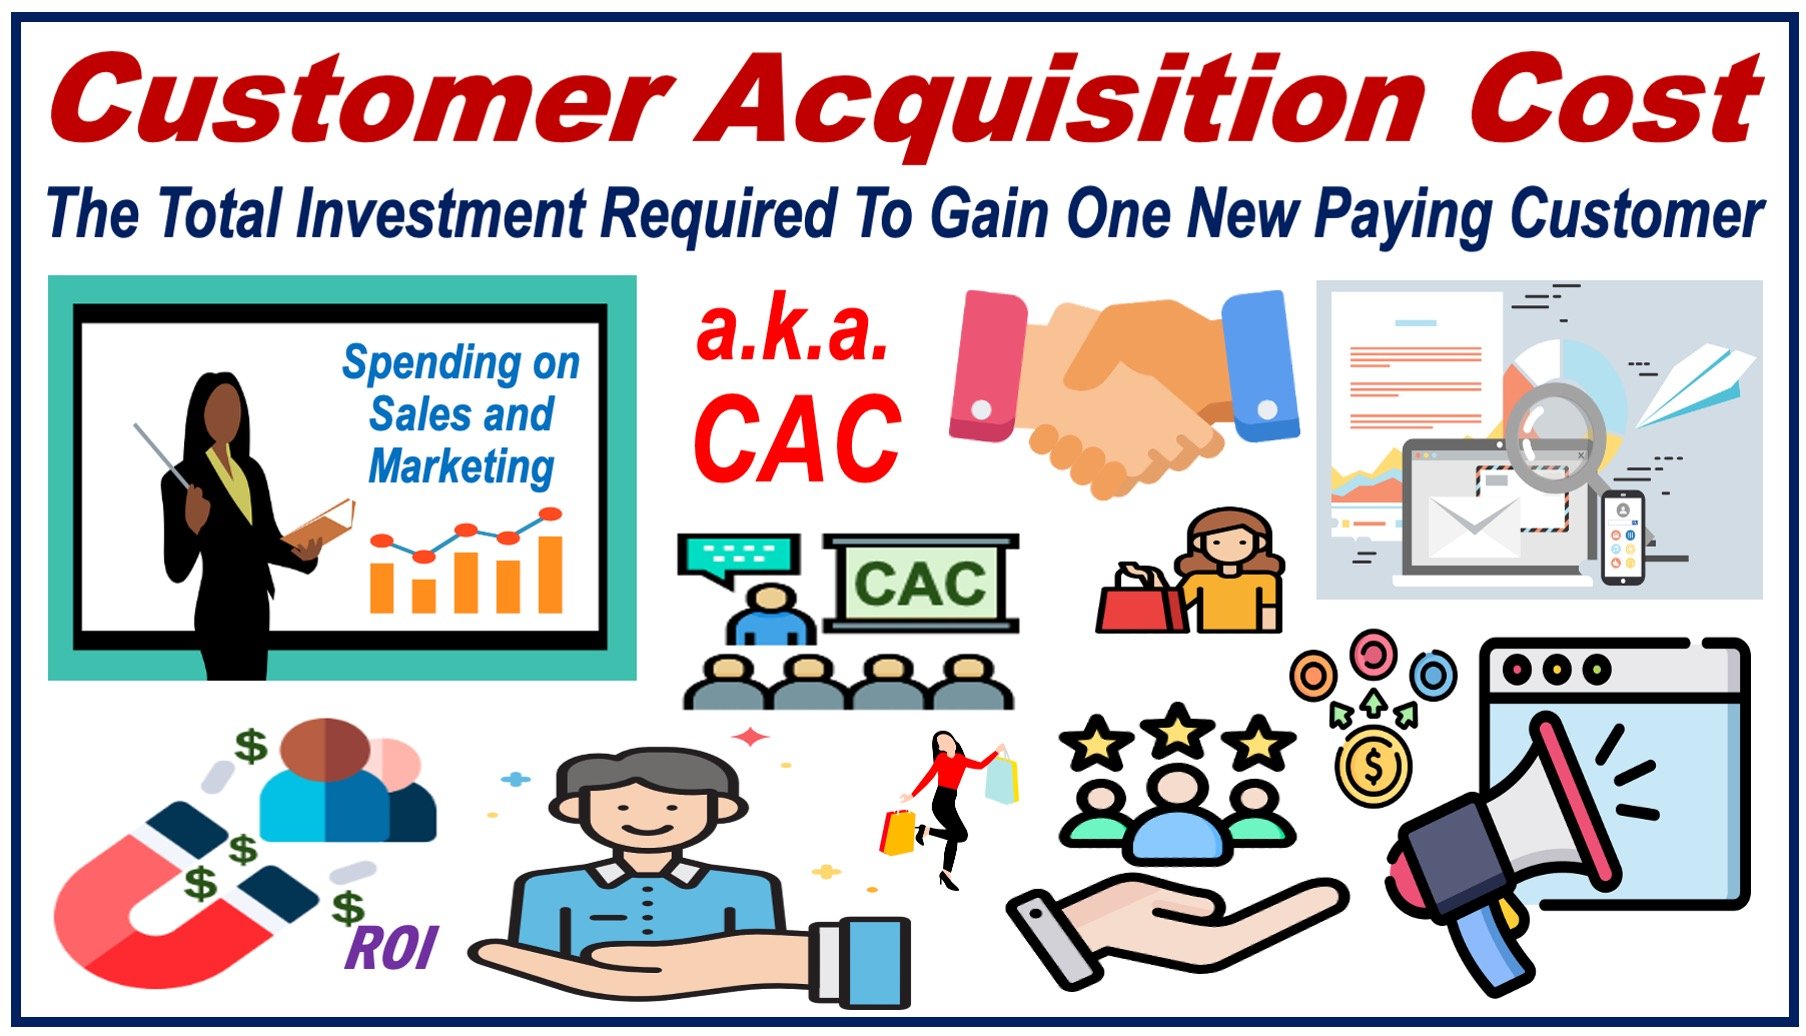 Many images representing customers, graphs, expenditure, sales, marketing, and a definition of Customer Acquisition Cost.